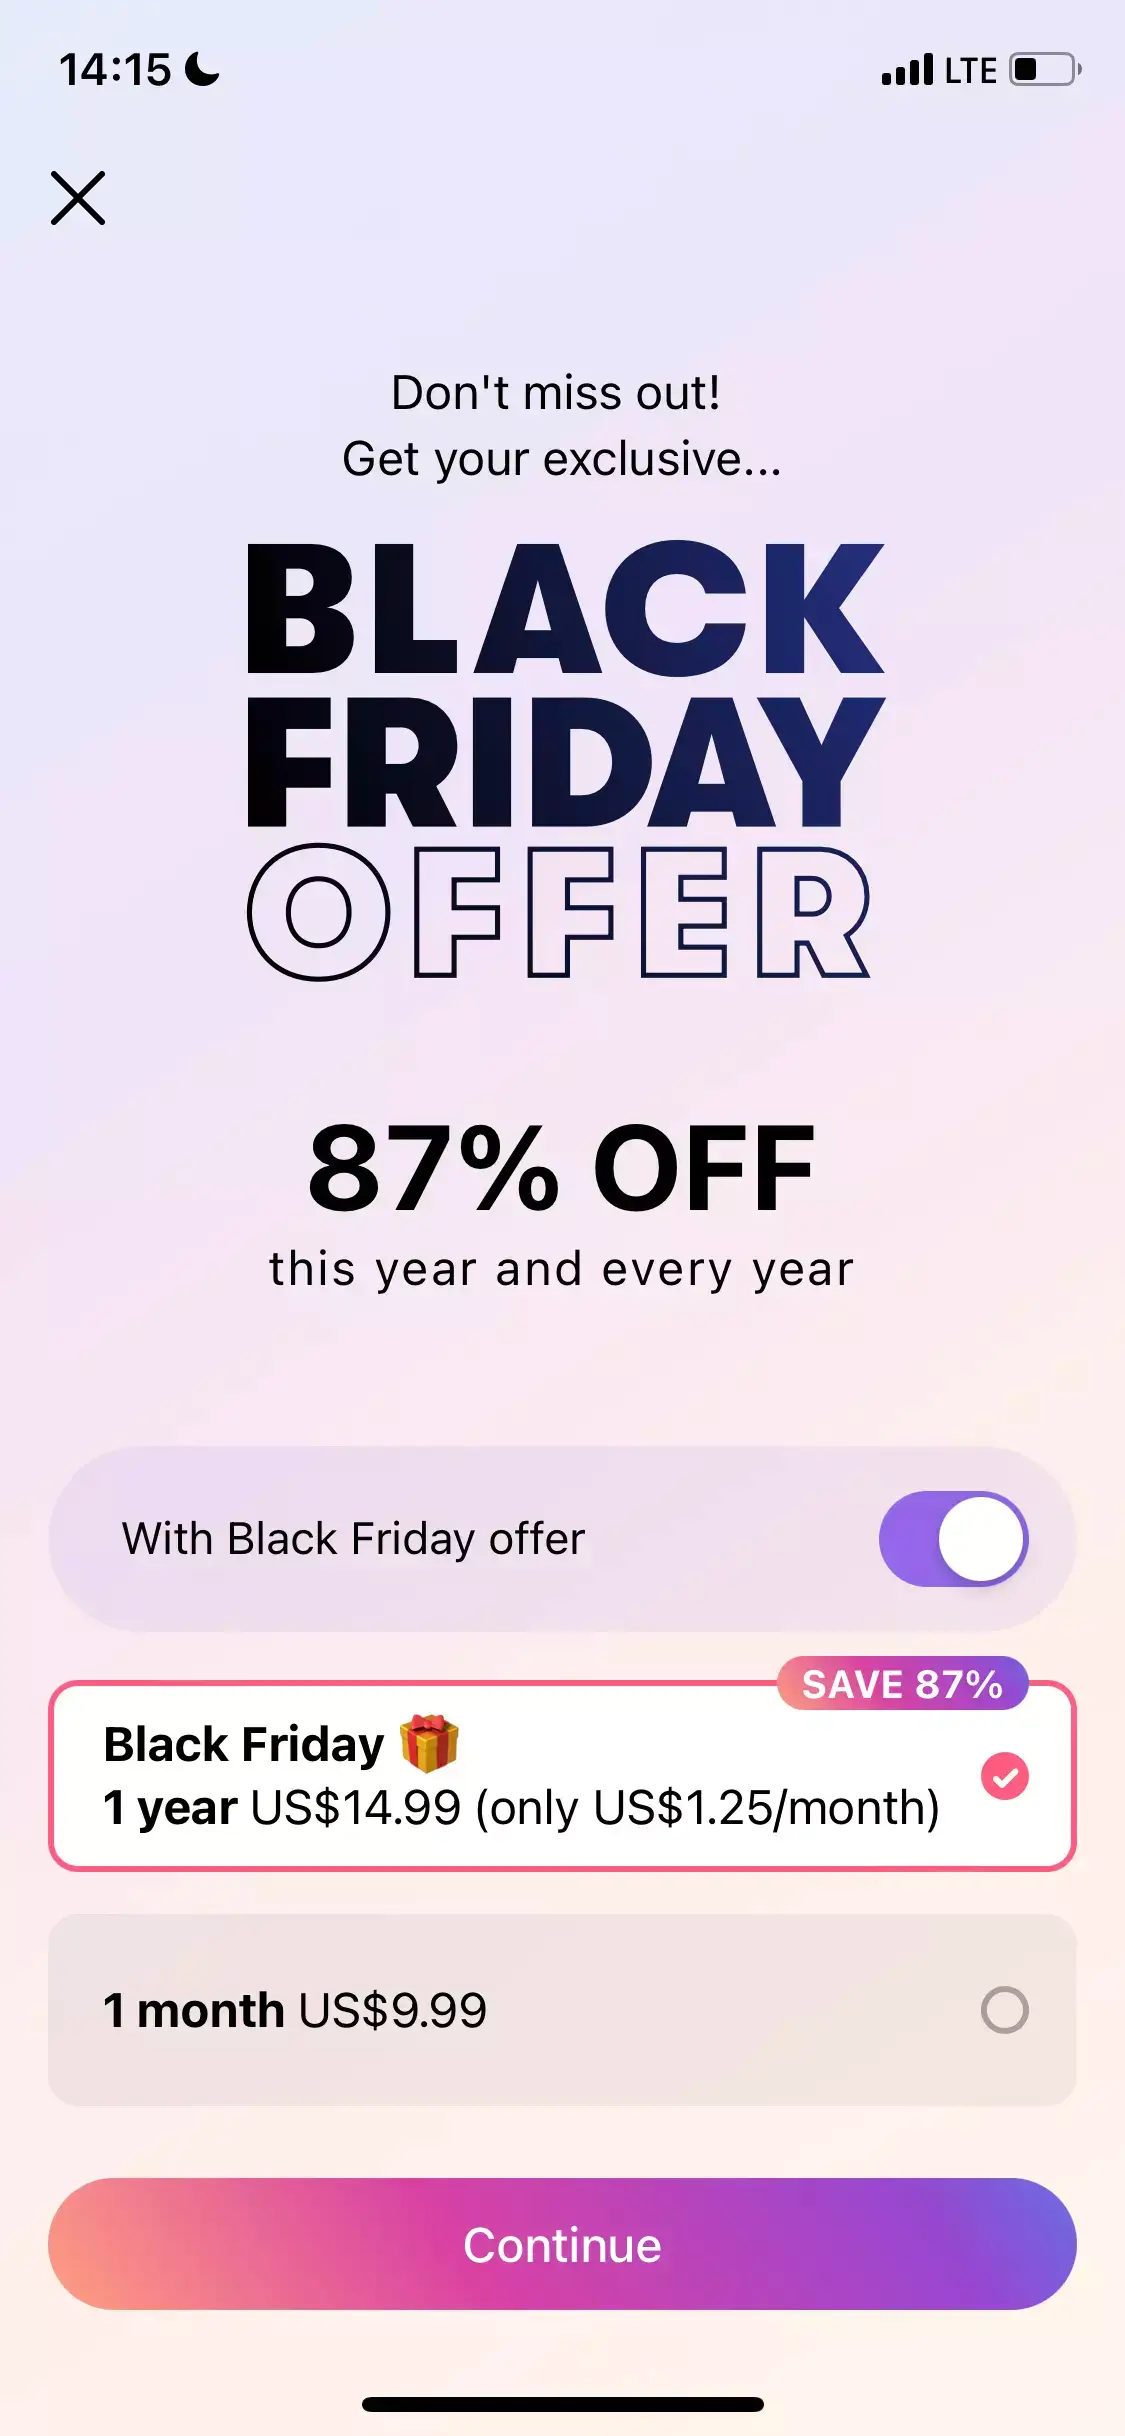 a black friday mobile paywall design by a period tracker Flo